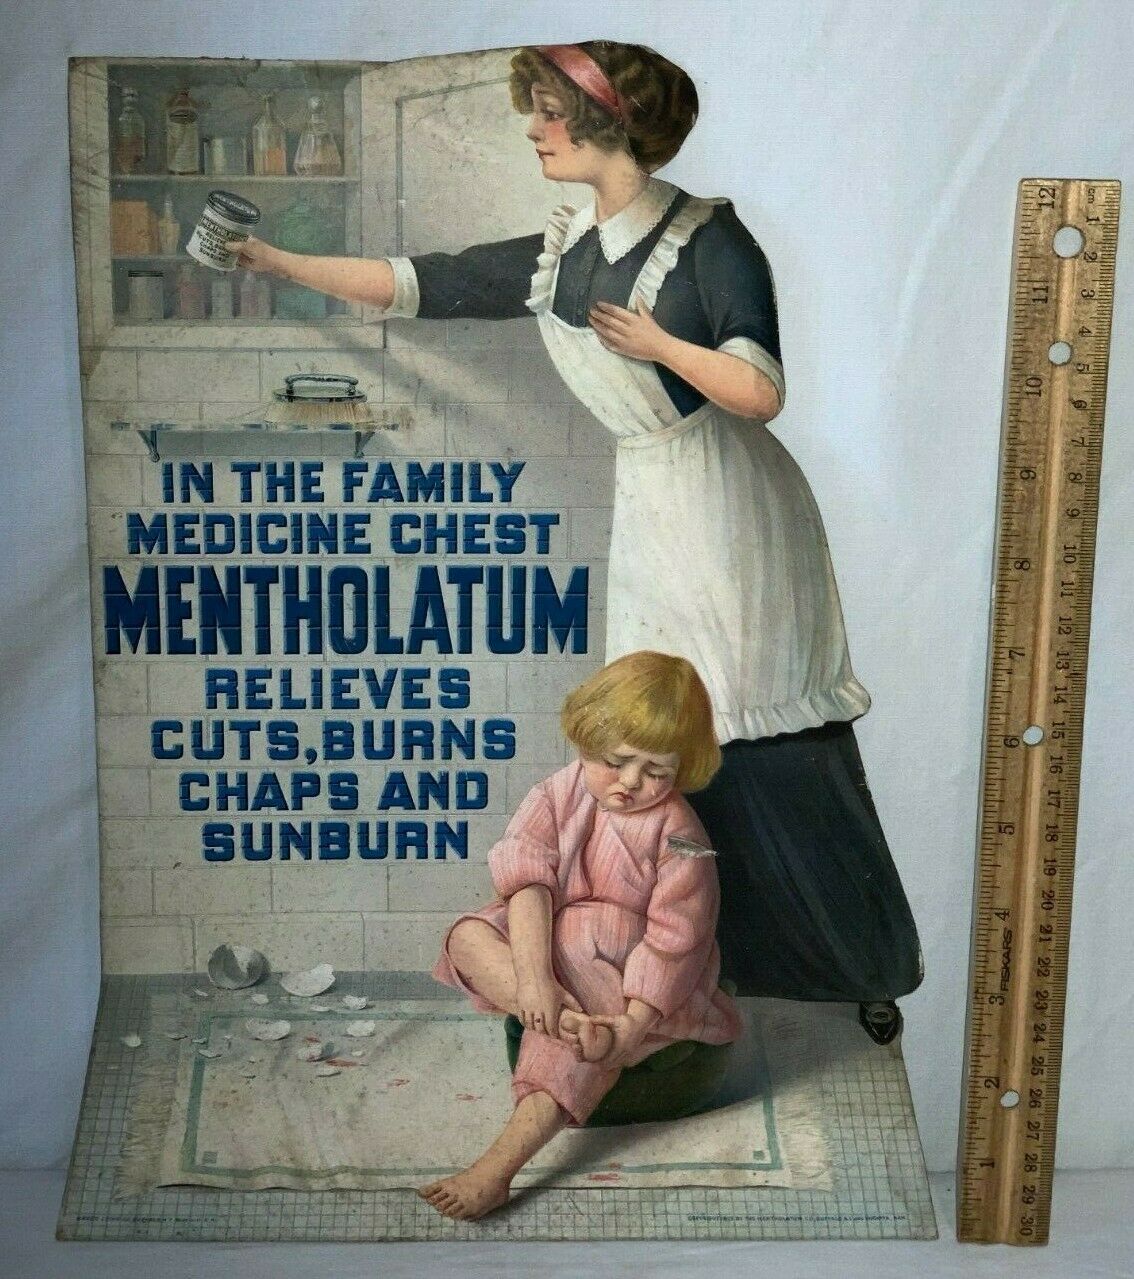 Antique Mentholatum First Aid Medicine Counter Sign Apothecary Drug Store Remedy